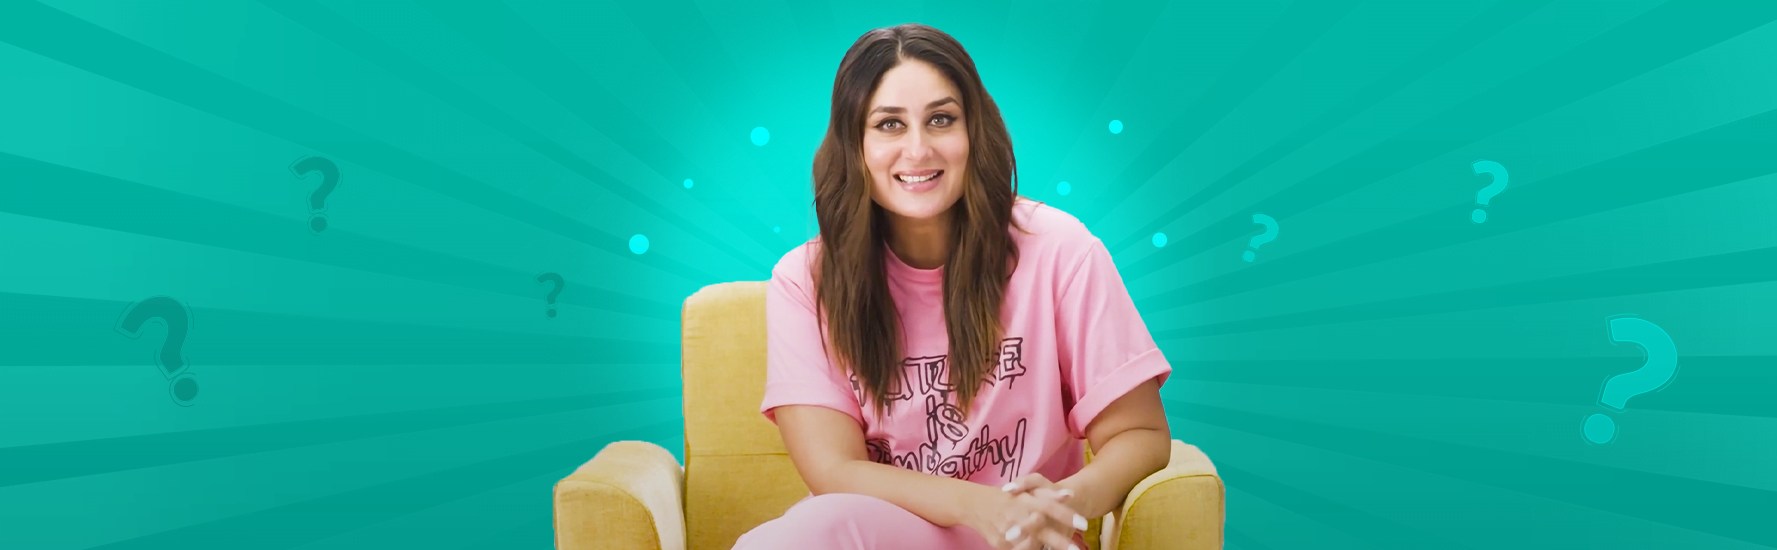 When Kareena Kapoor said no to her fans and more - News18